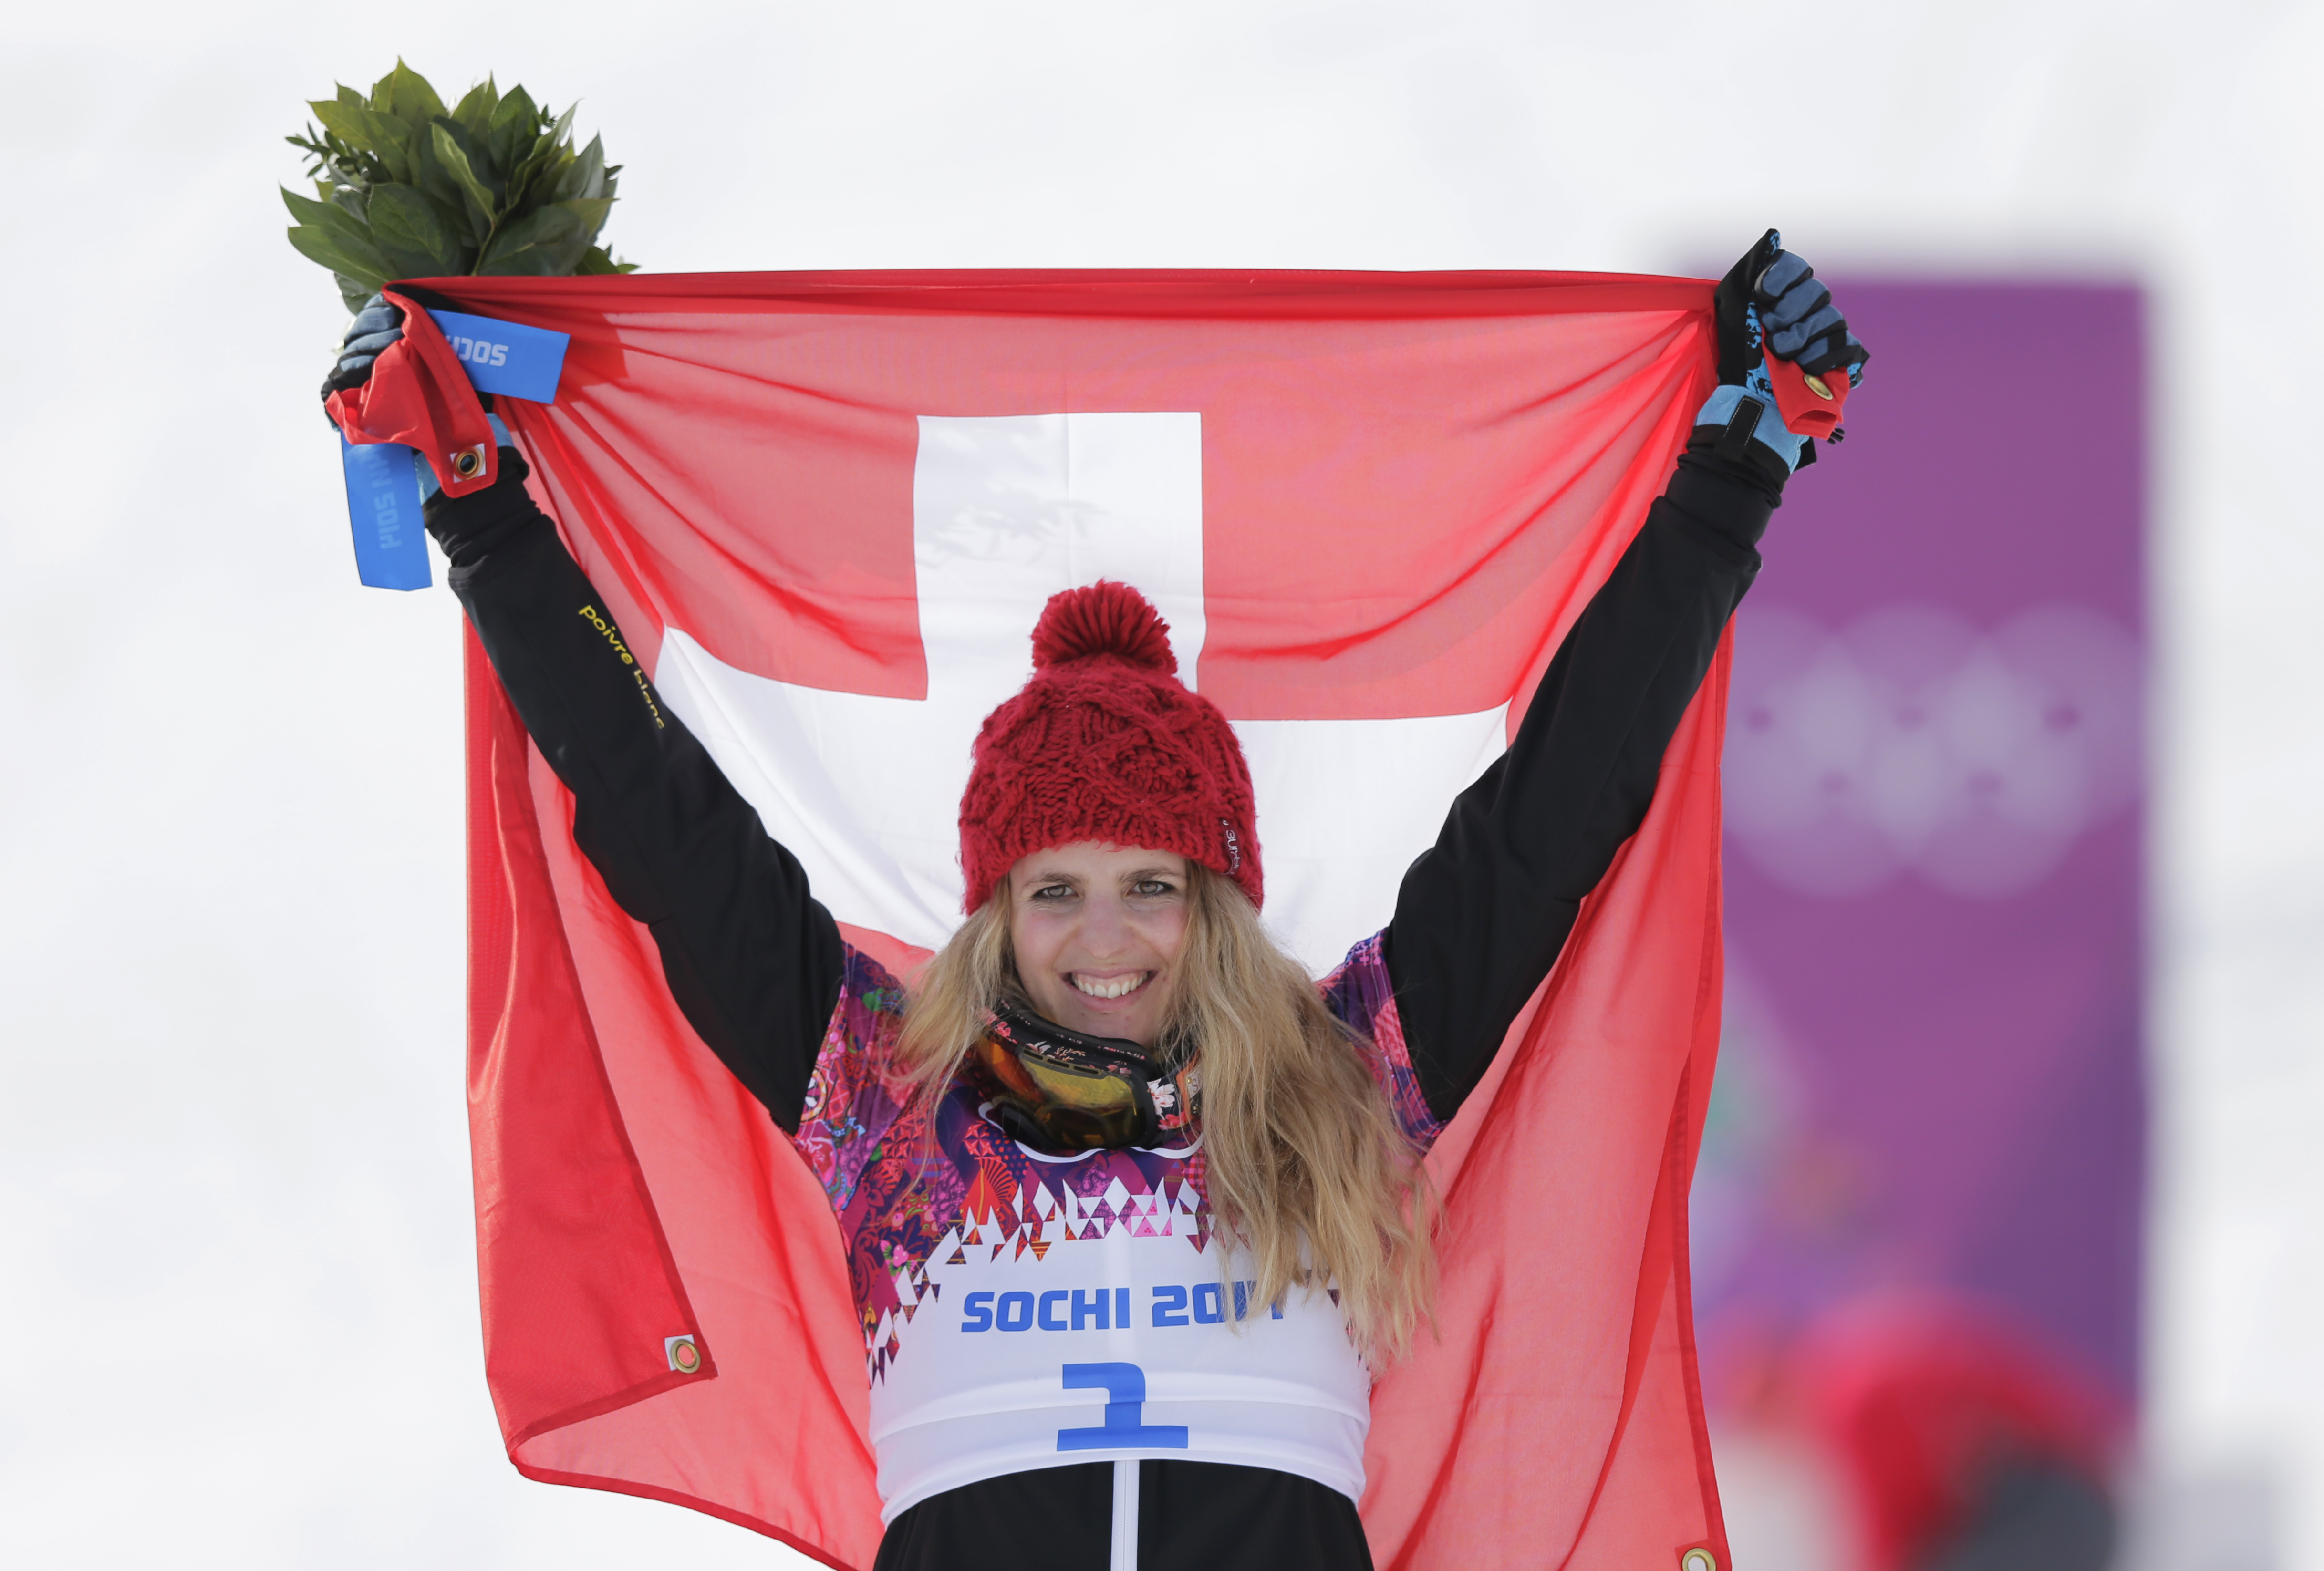 Women's snowboard parallel giant slalom gold medalist Switzerland's Patrizia Kummer celebrates with the national flag at the Rosa Khutor Extreme Park, at the 2014 Winter Olympics, Wednesday, Feb. 19, 2014, in Krasnaya Polyana, Russia. (AP Photo/Andy Wong)